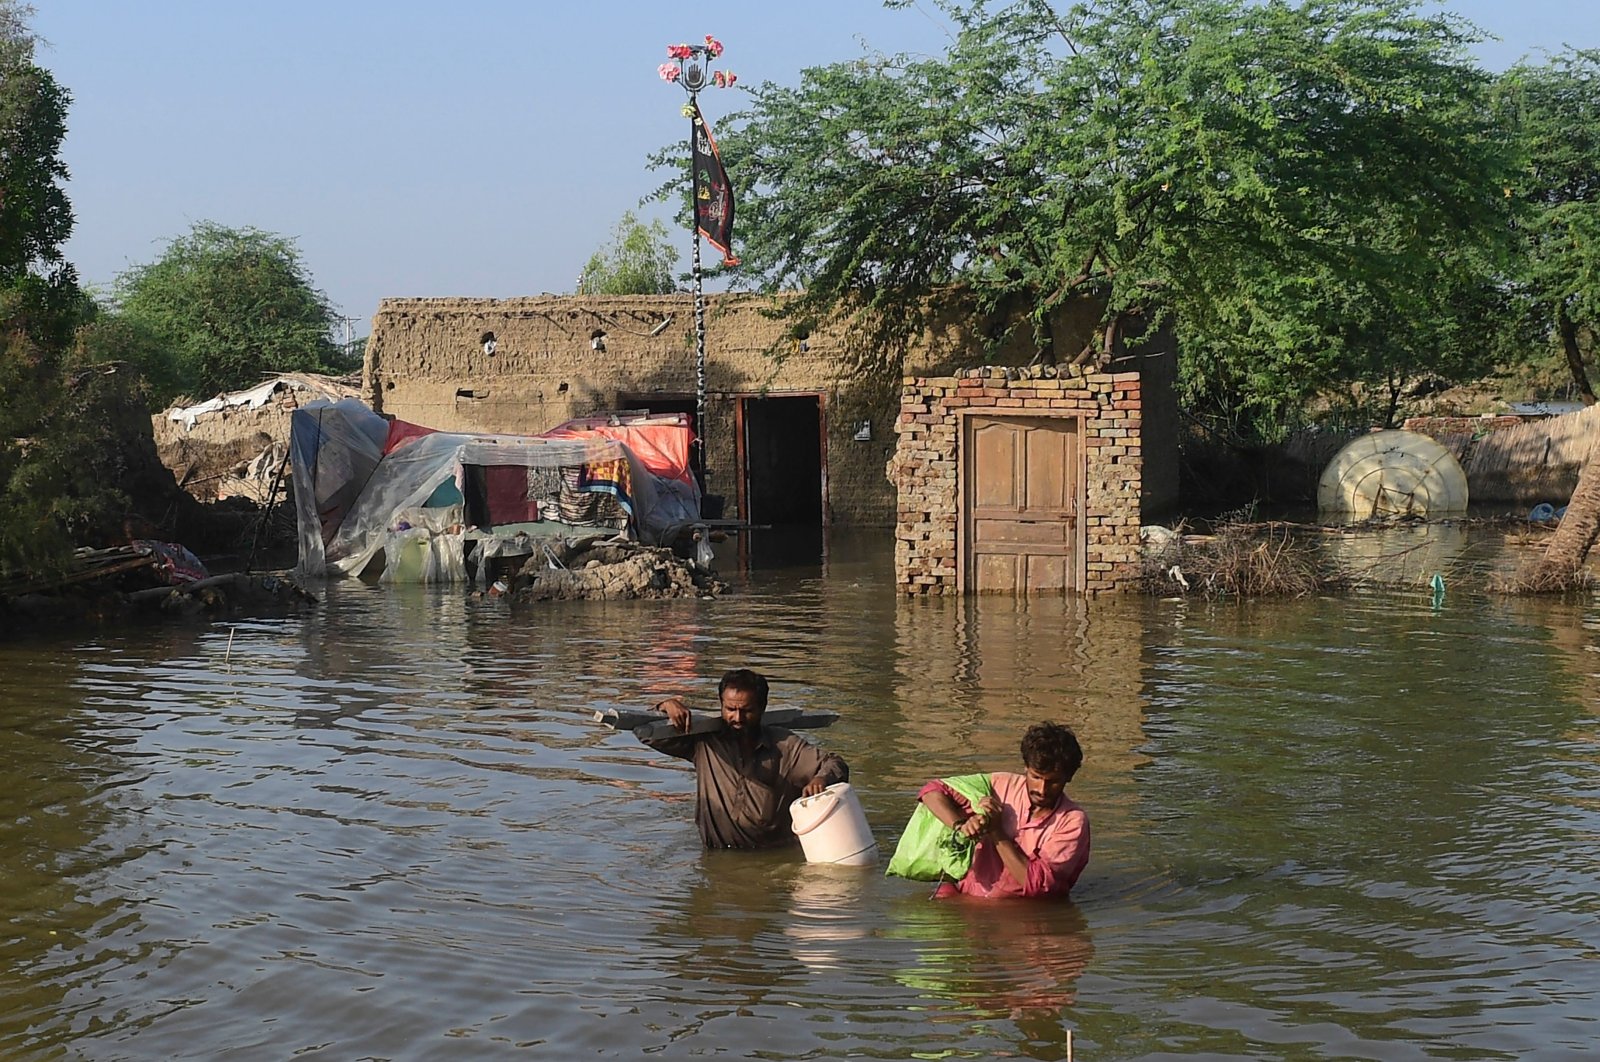 People carry their belongings out from their flooded home in Shikarpur, Sindh province, Pakistan, Aug. 31, 2022. (AFP Photo)